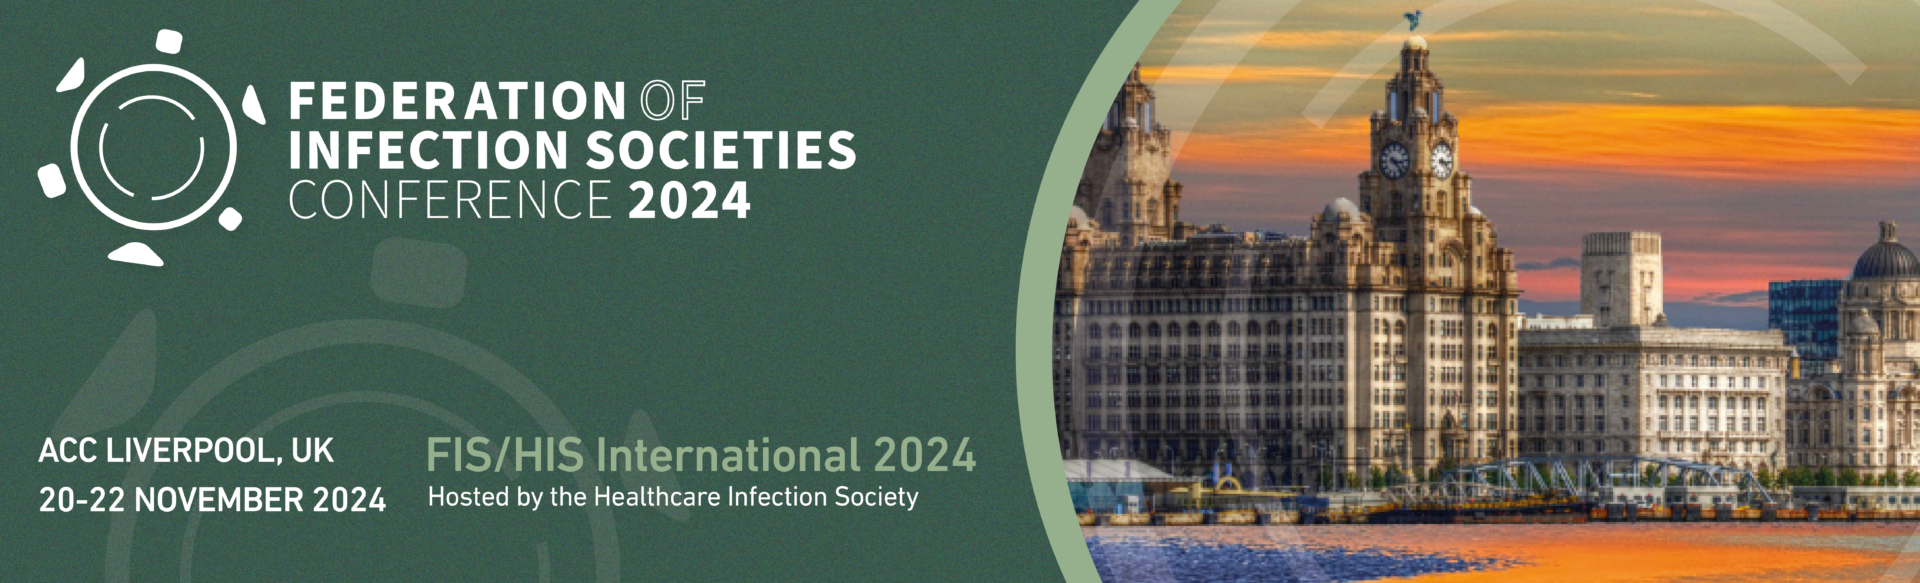 Federation of Infection Societies Conference 2024 - FIS/HIS International 2024